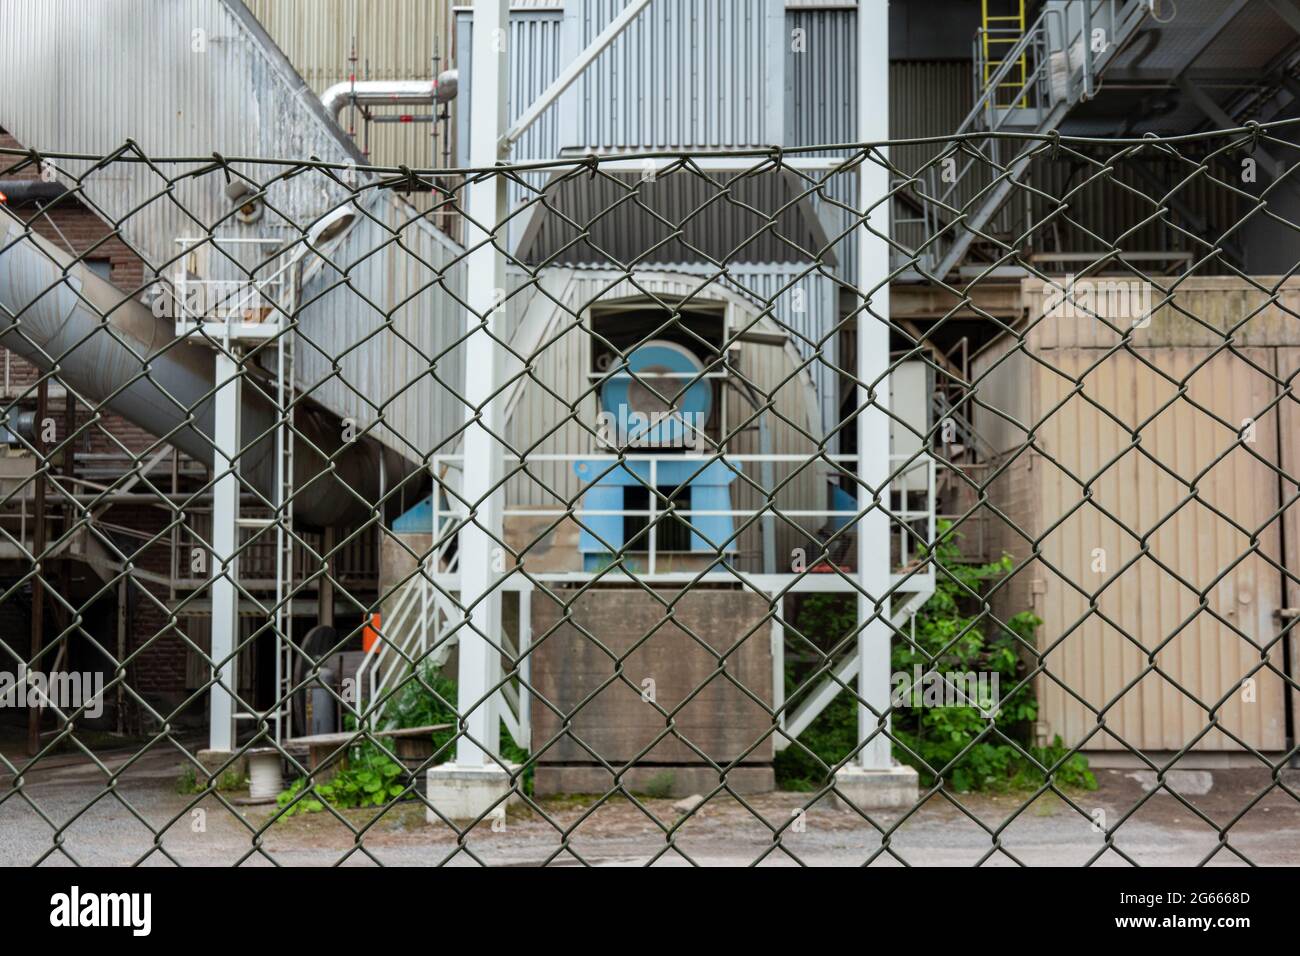 Industrial property behind chain link fence Stock Photo